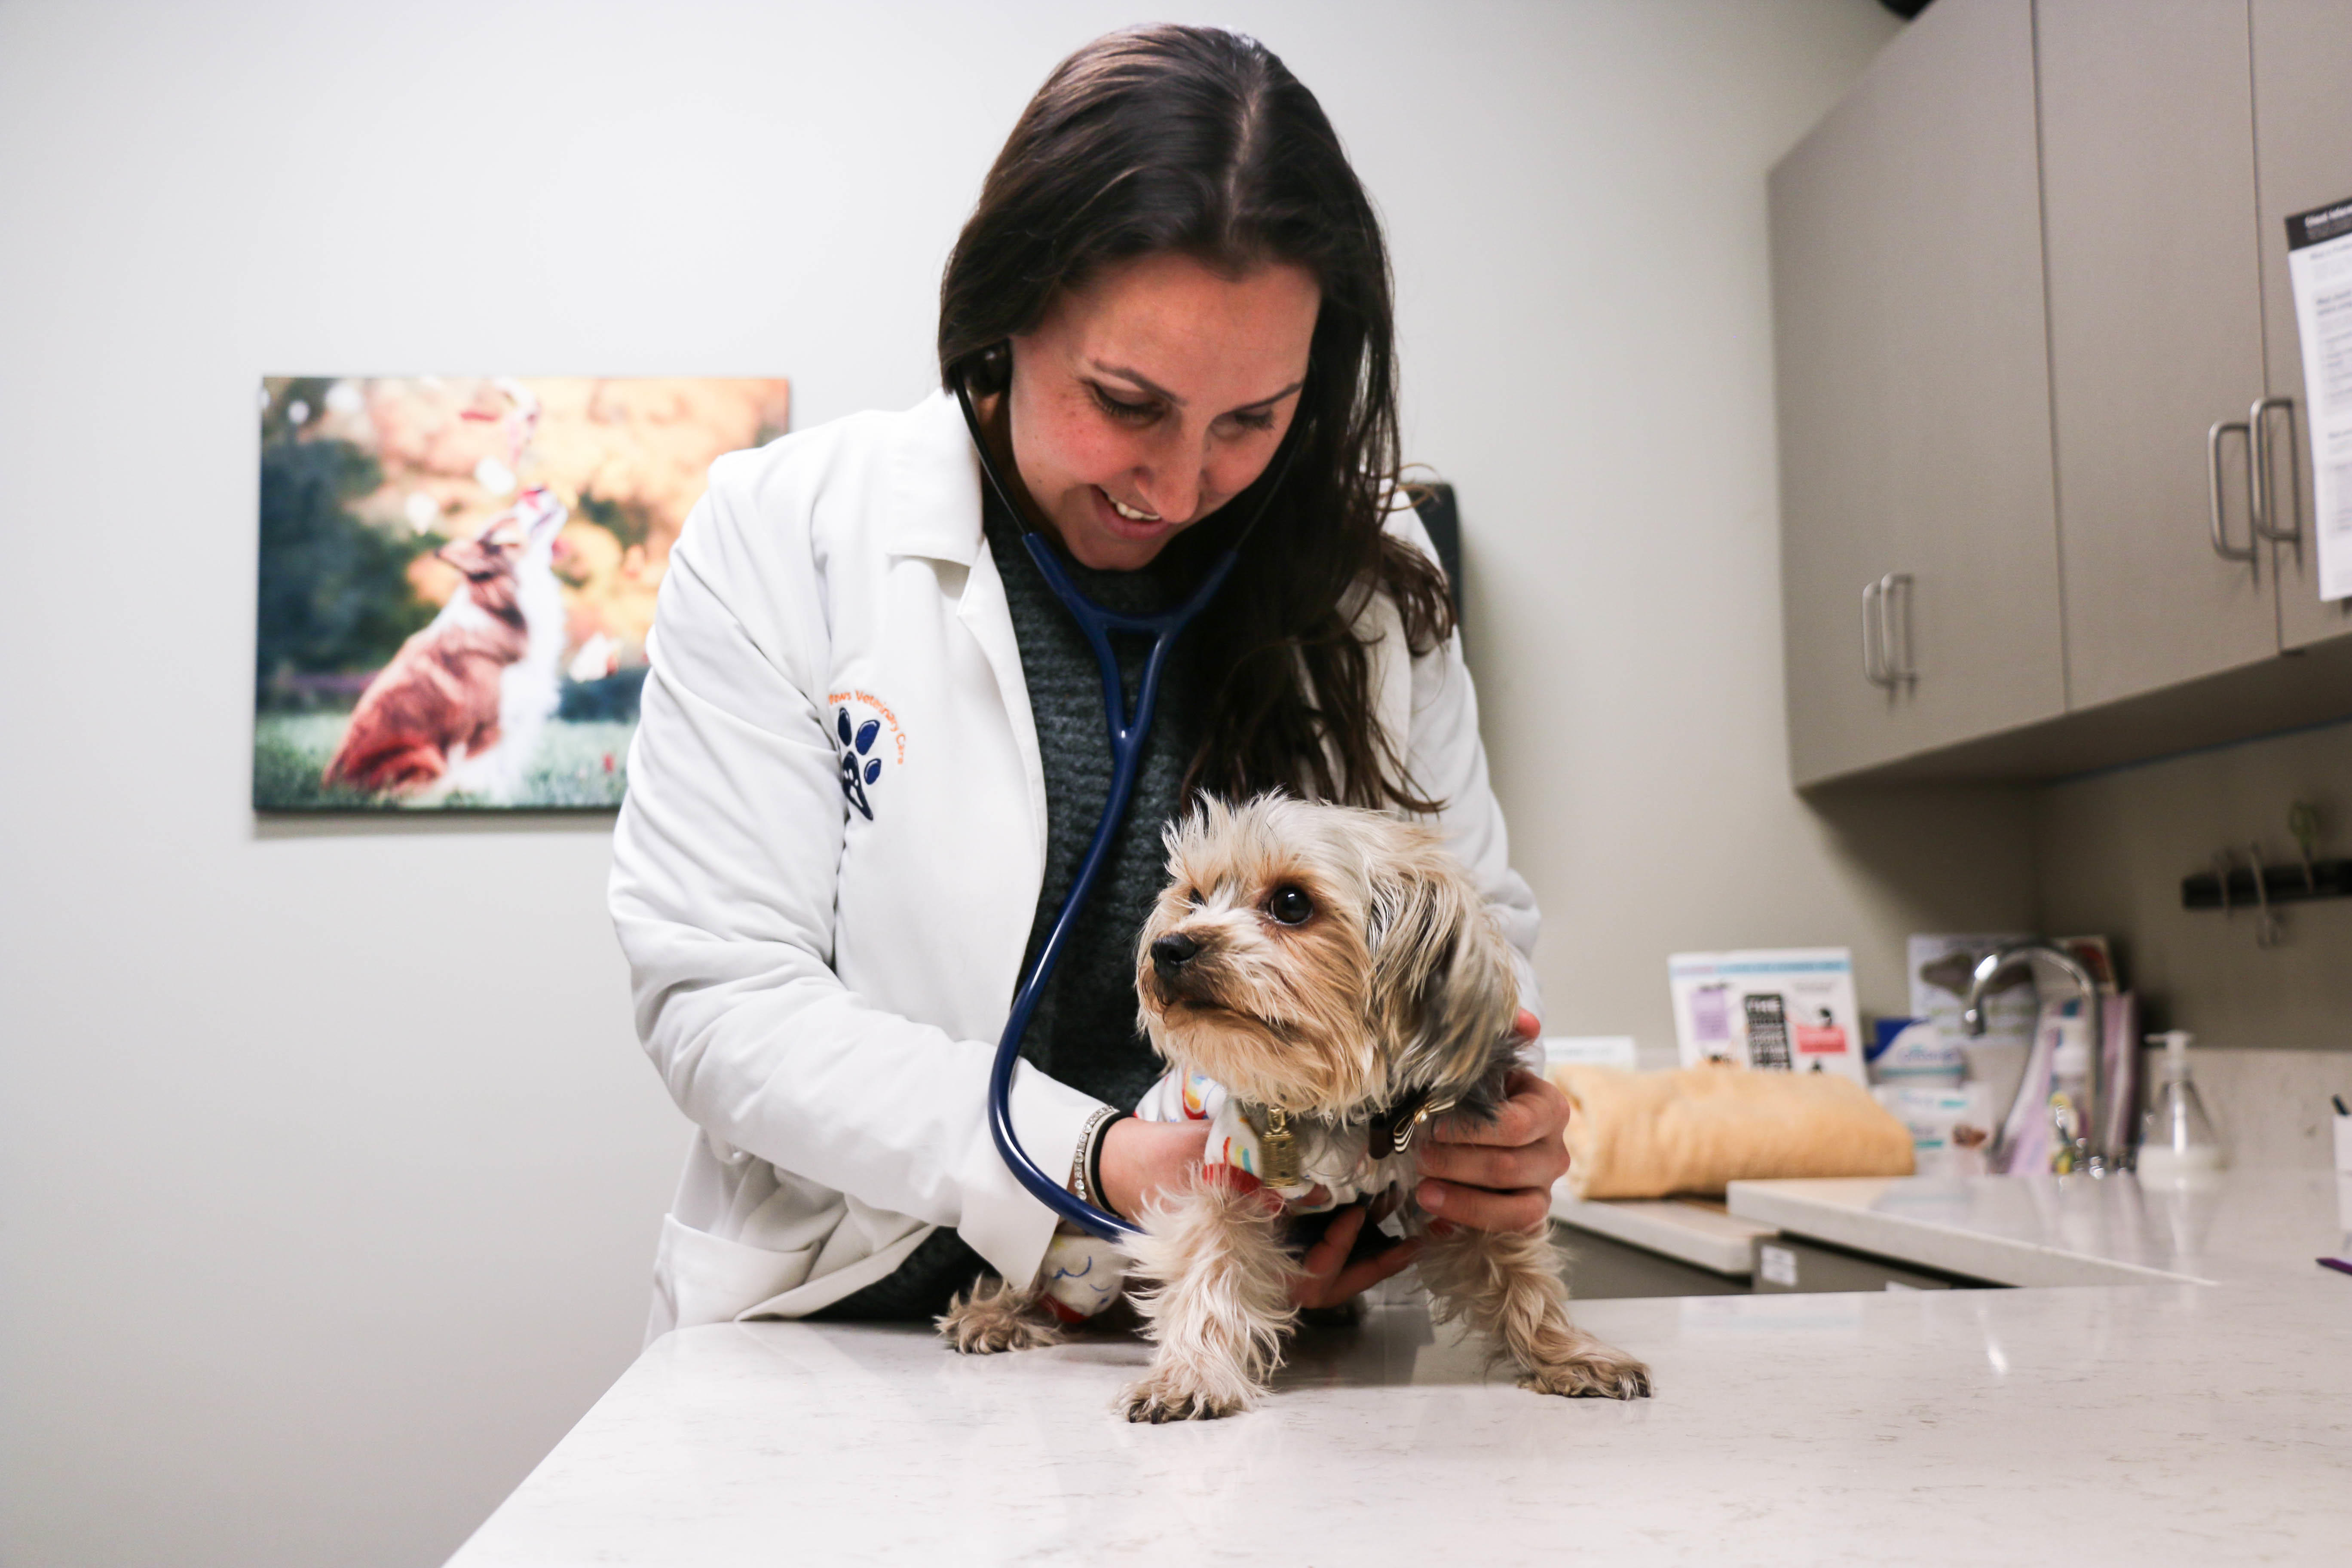 Solely by listening to breathing patterns, your veterinarian can assess general pulmonary health.